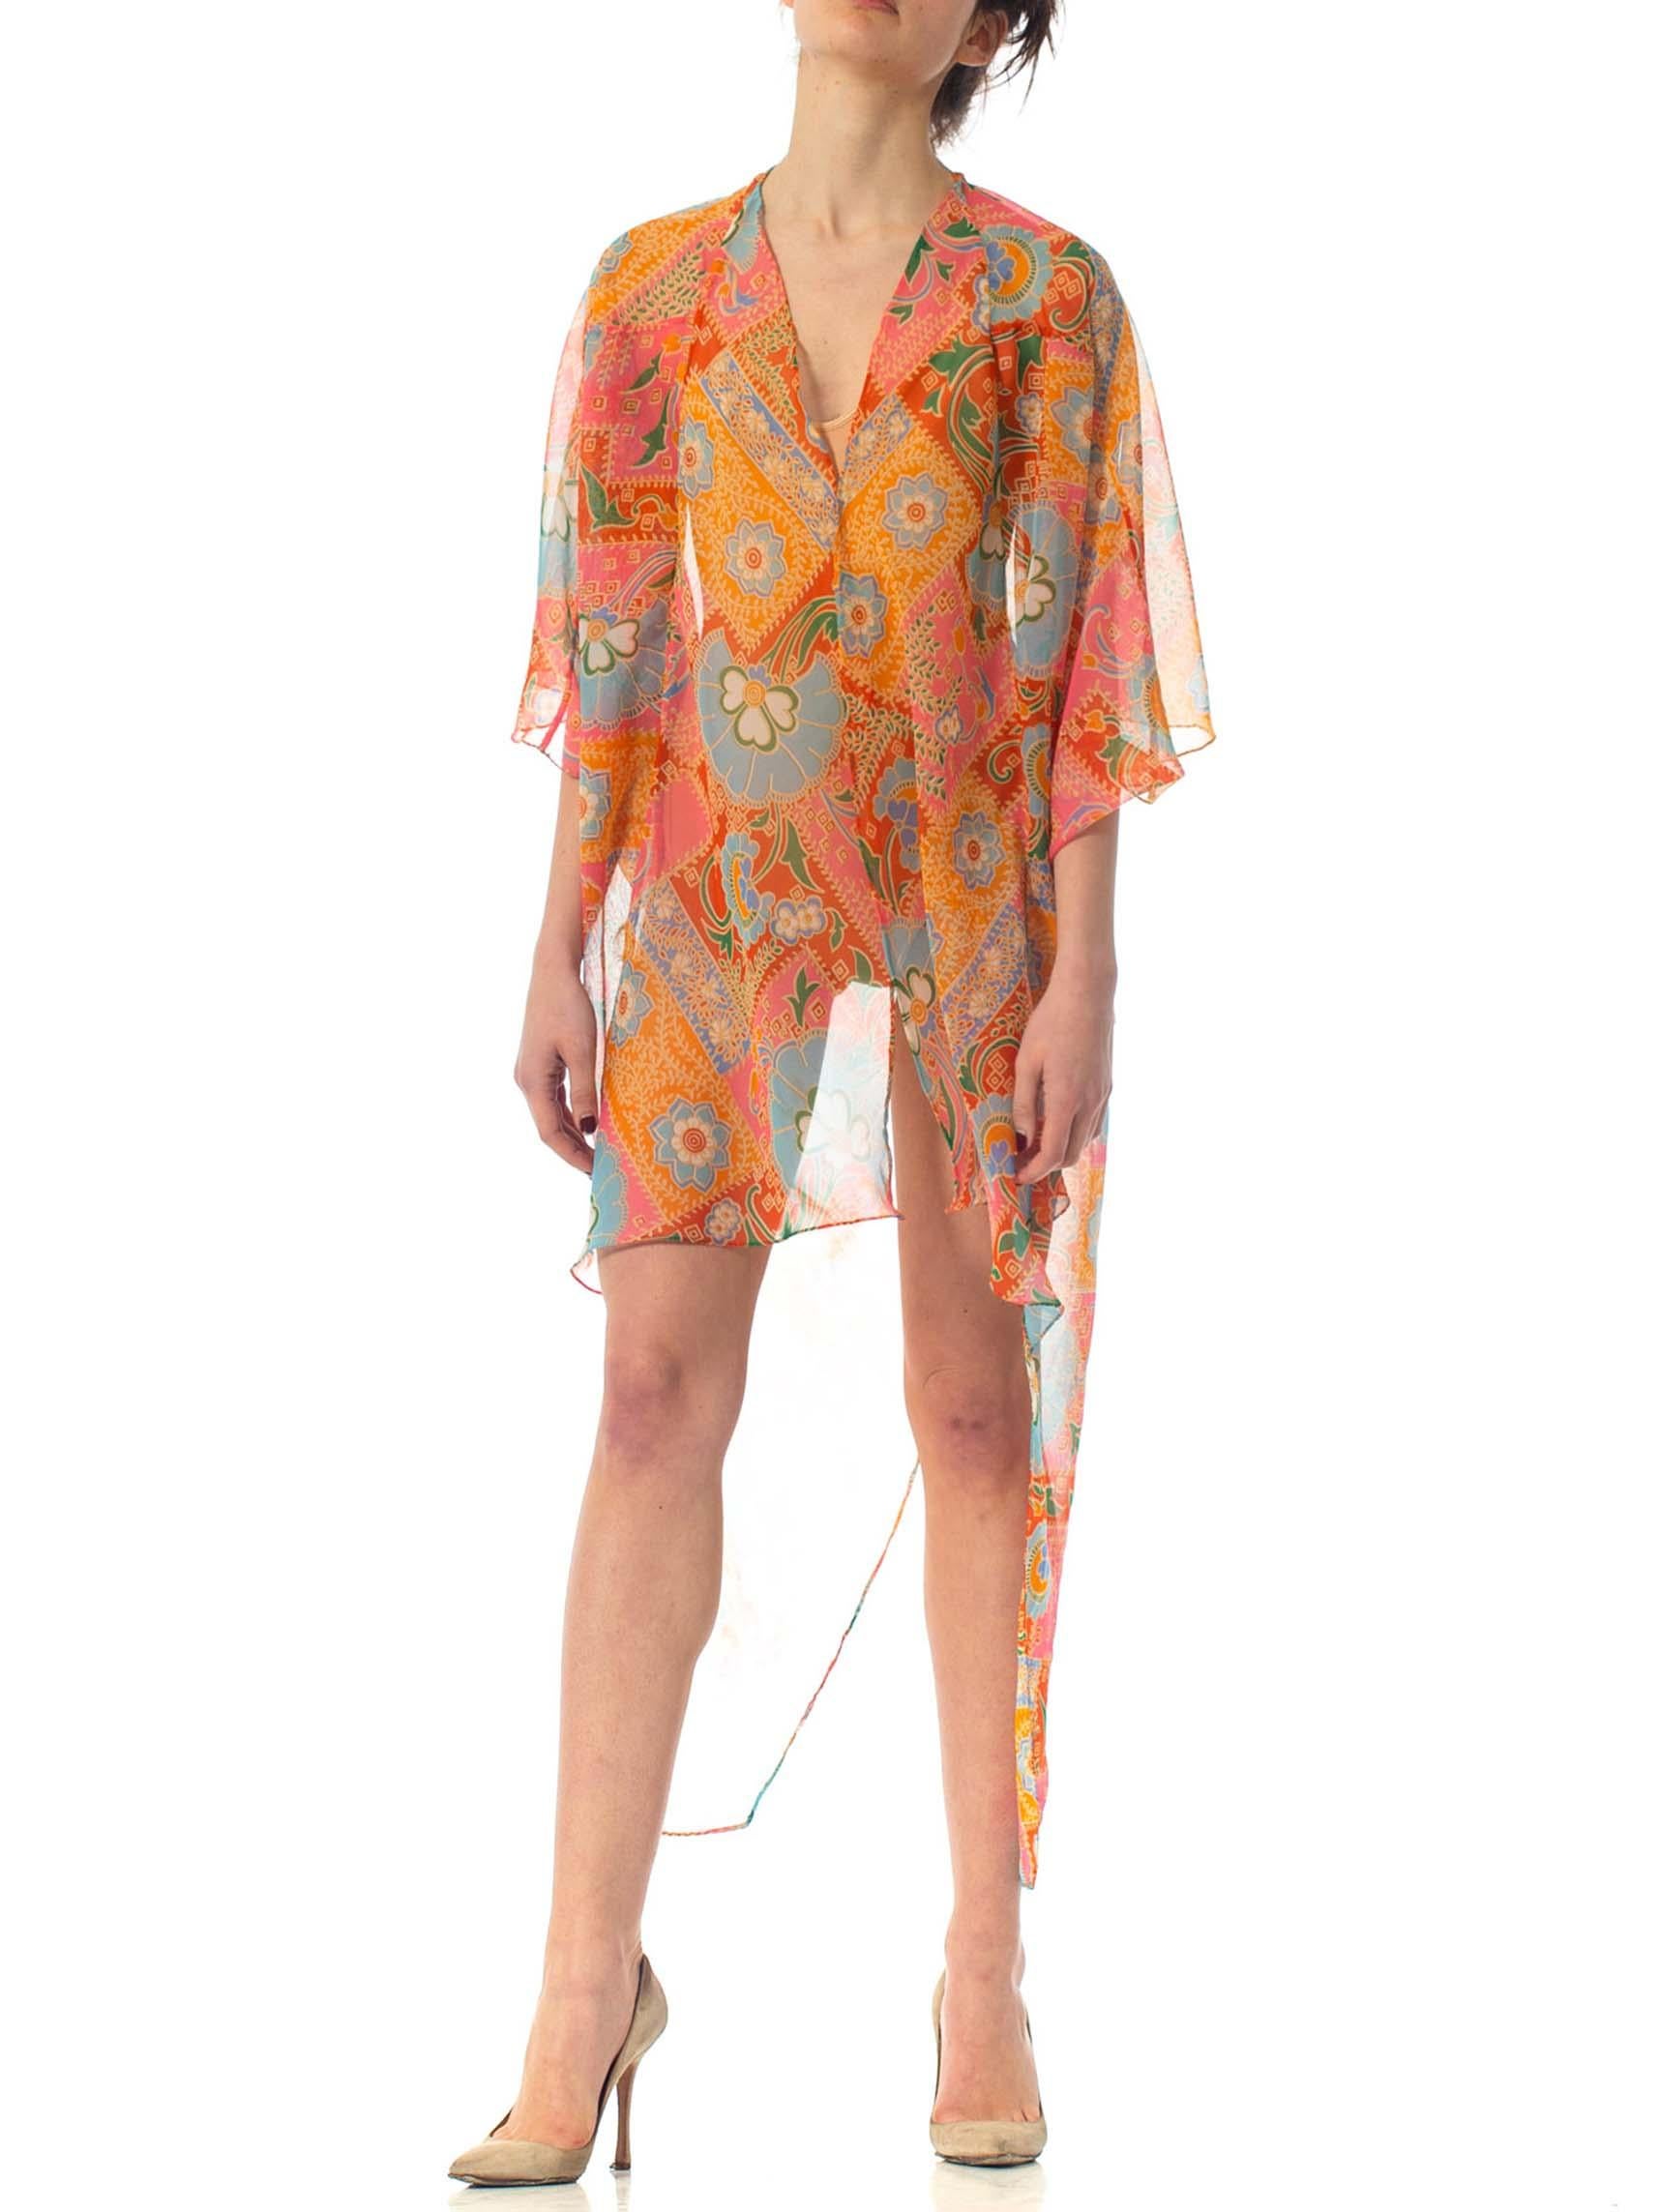 Women's MORPHEW COLLECTION Psychedelic Polyester Organza Beach Cover-Up Cocoon